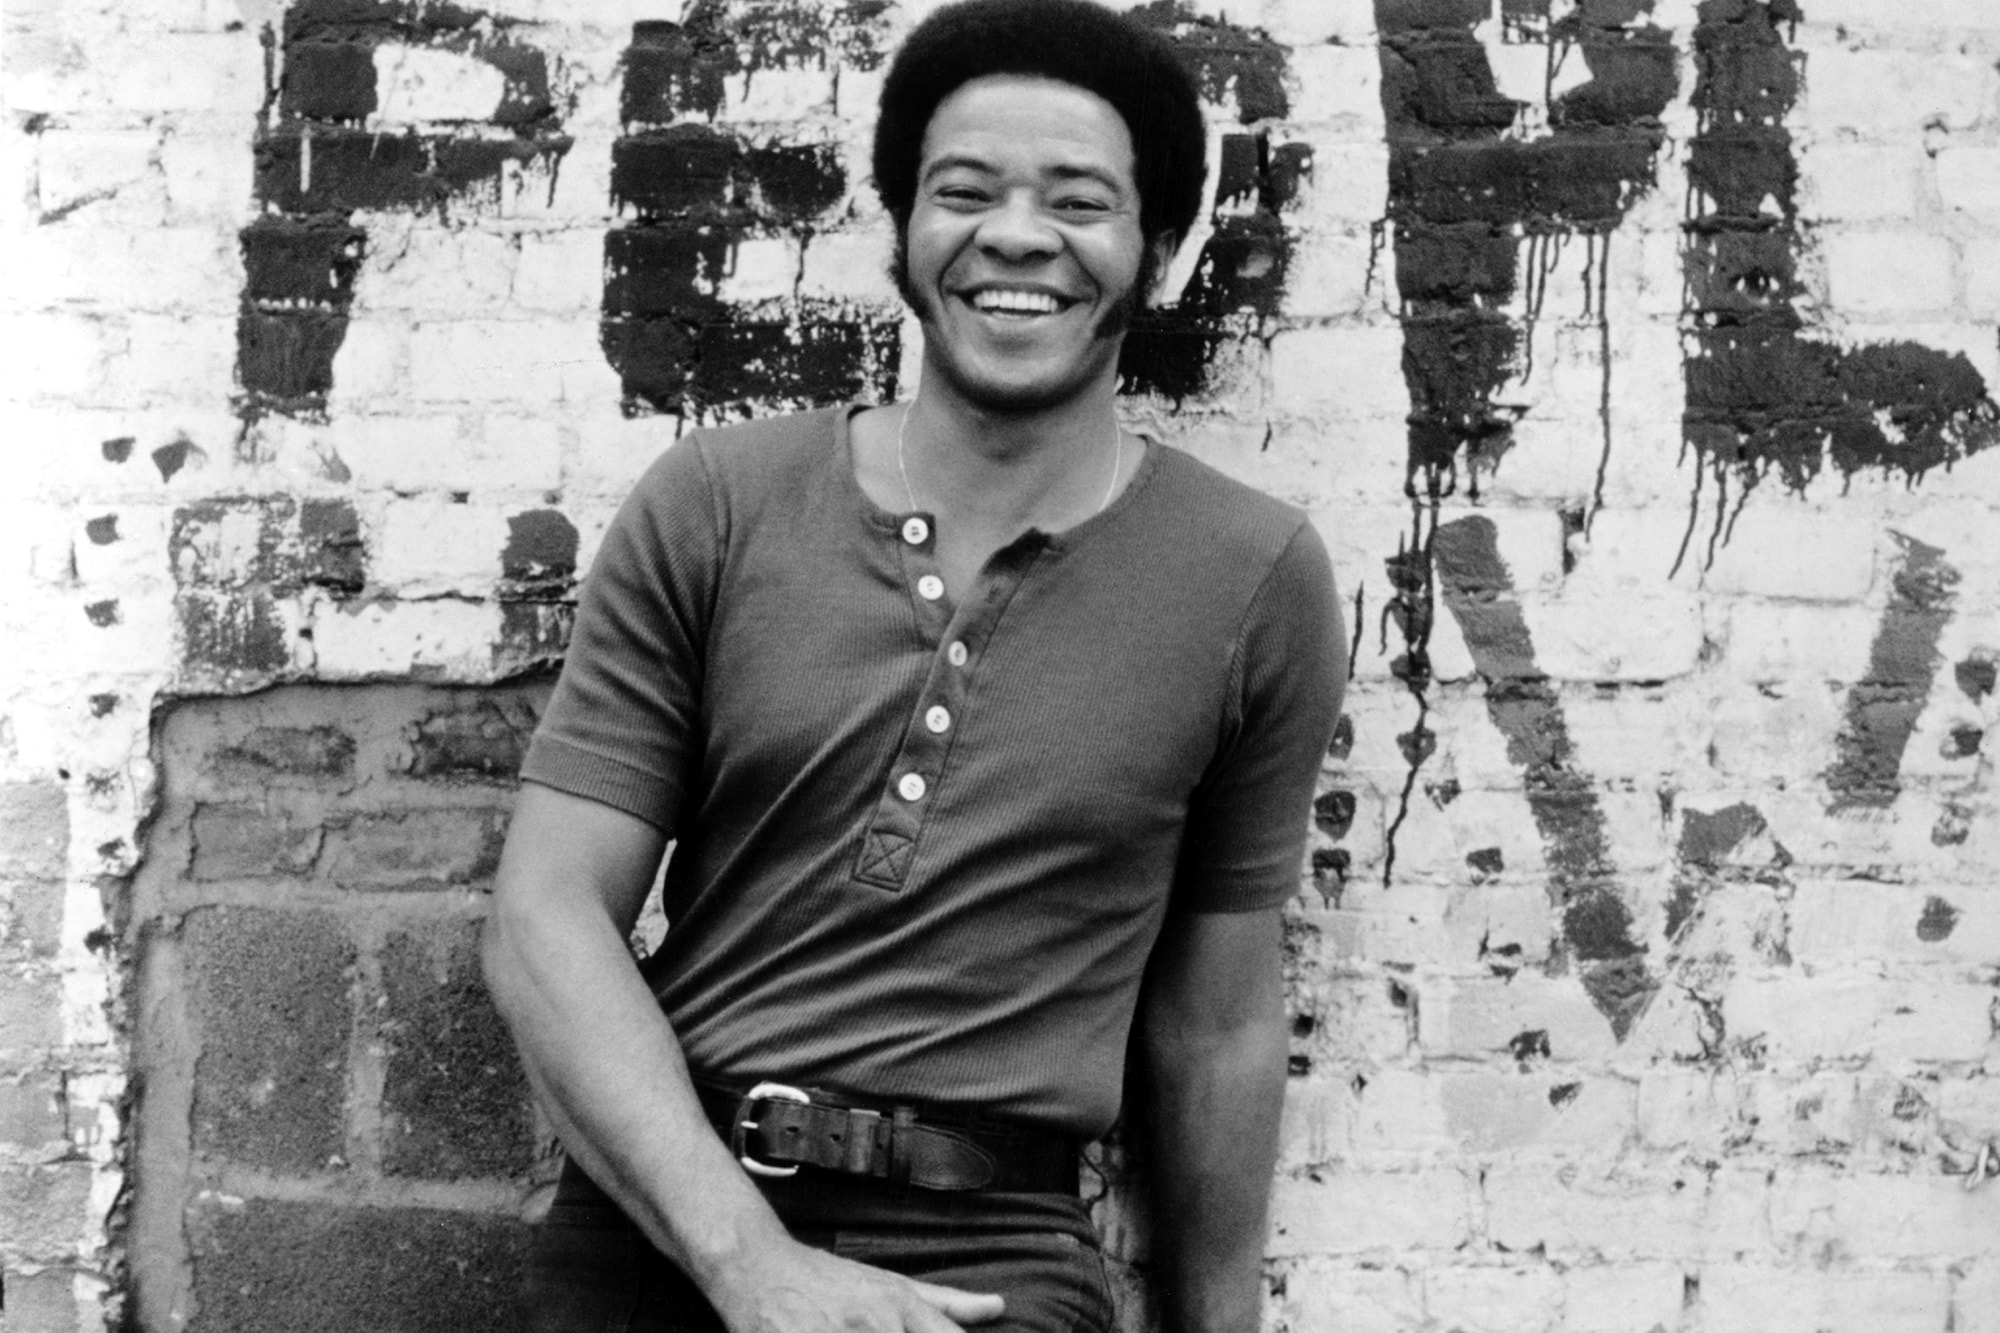 Ain't No Sunshine Musician Singer Songwriter Soul Bill Withers Dead at 81 Dies Rest In Peace Passed Away Grandma's Hands HYPEBEAST Lean On Me The Beatles 1970s Music Listen Steam 